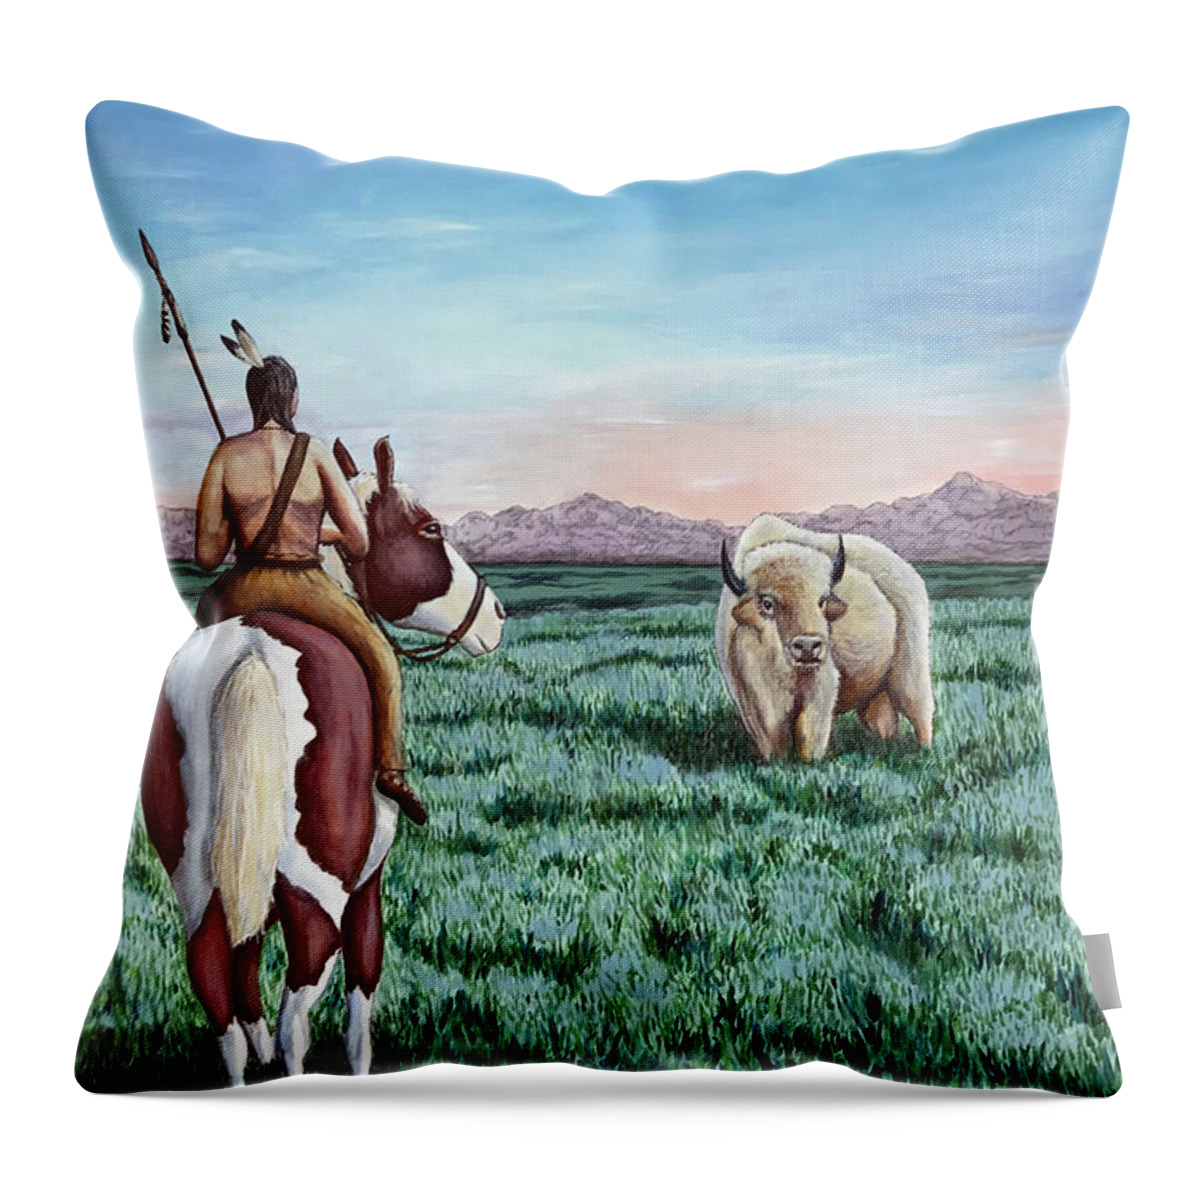 Native American Throw Pillow featuring the painting Spiritual Encounter by Mr Dill